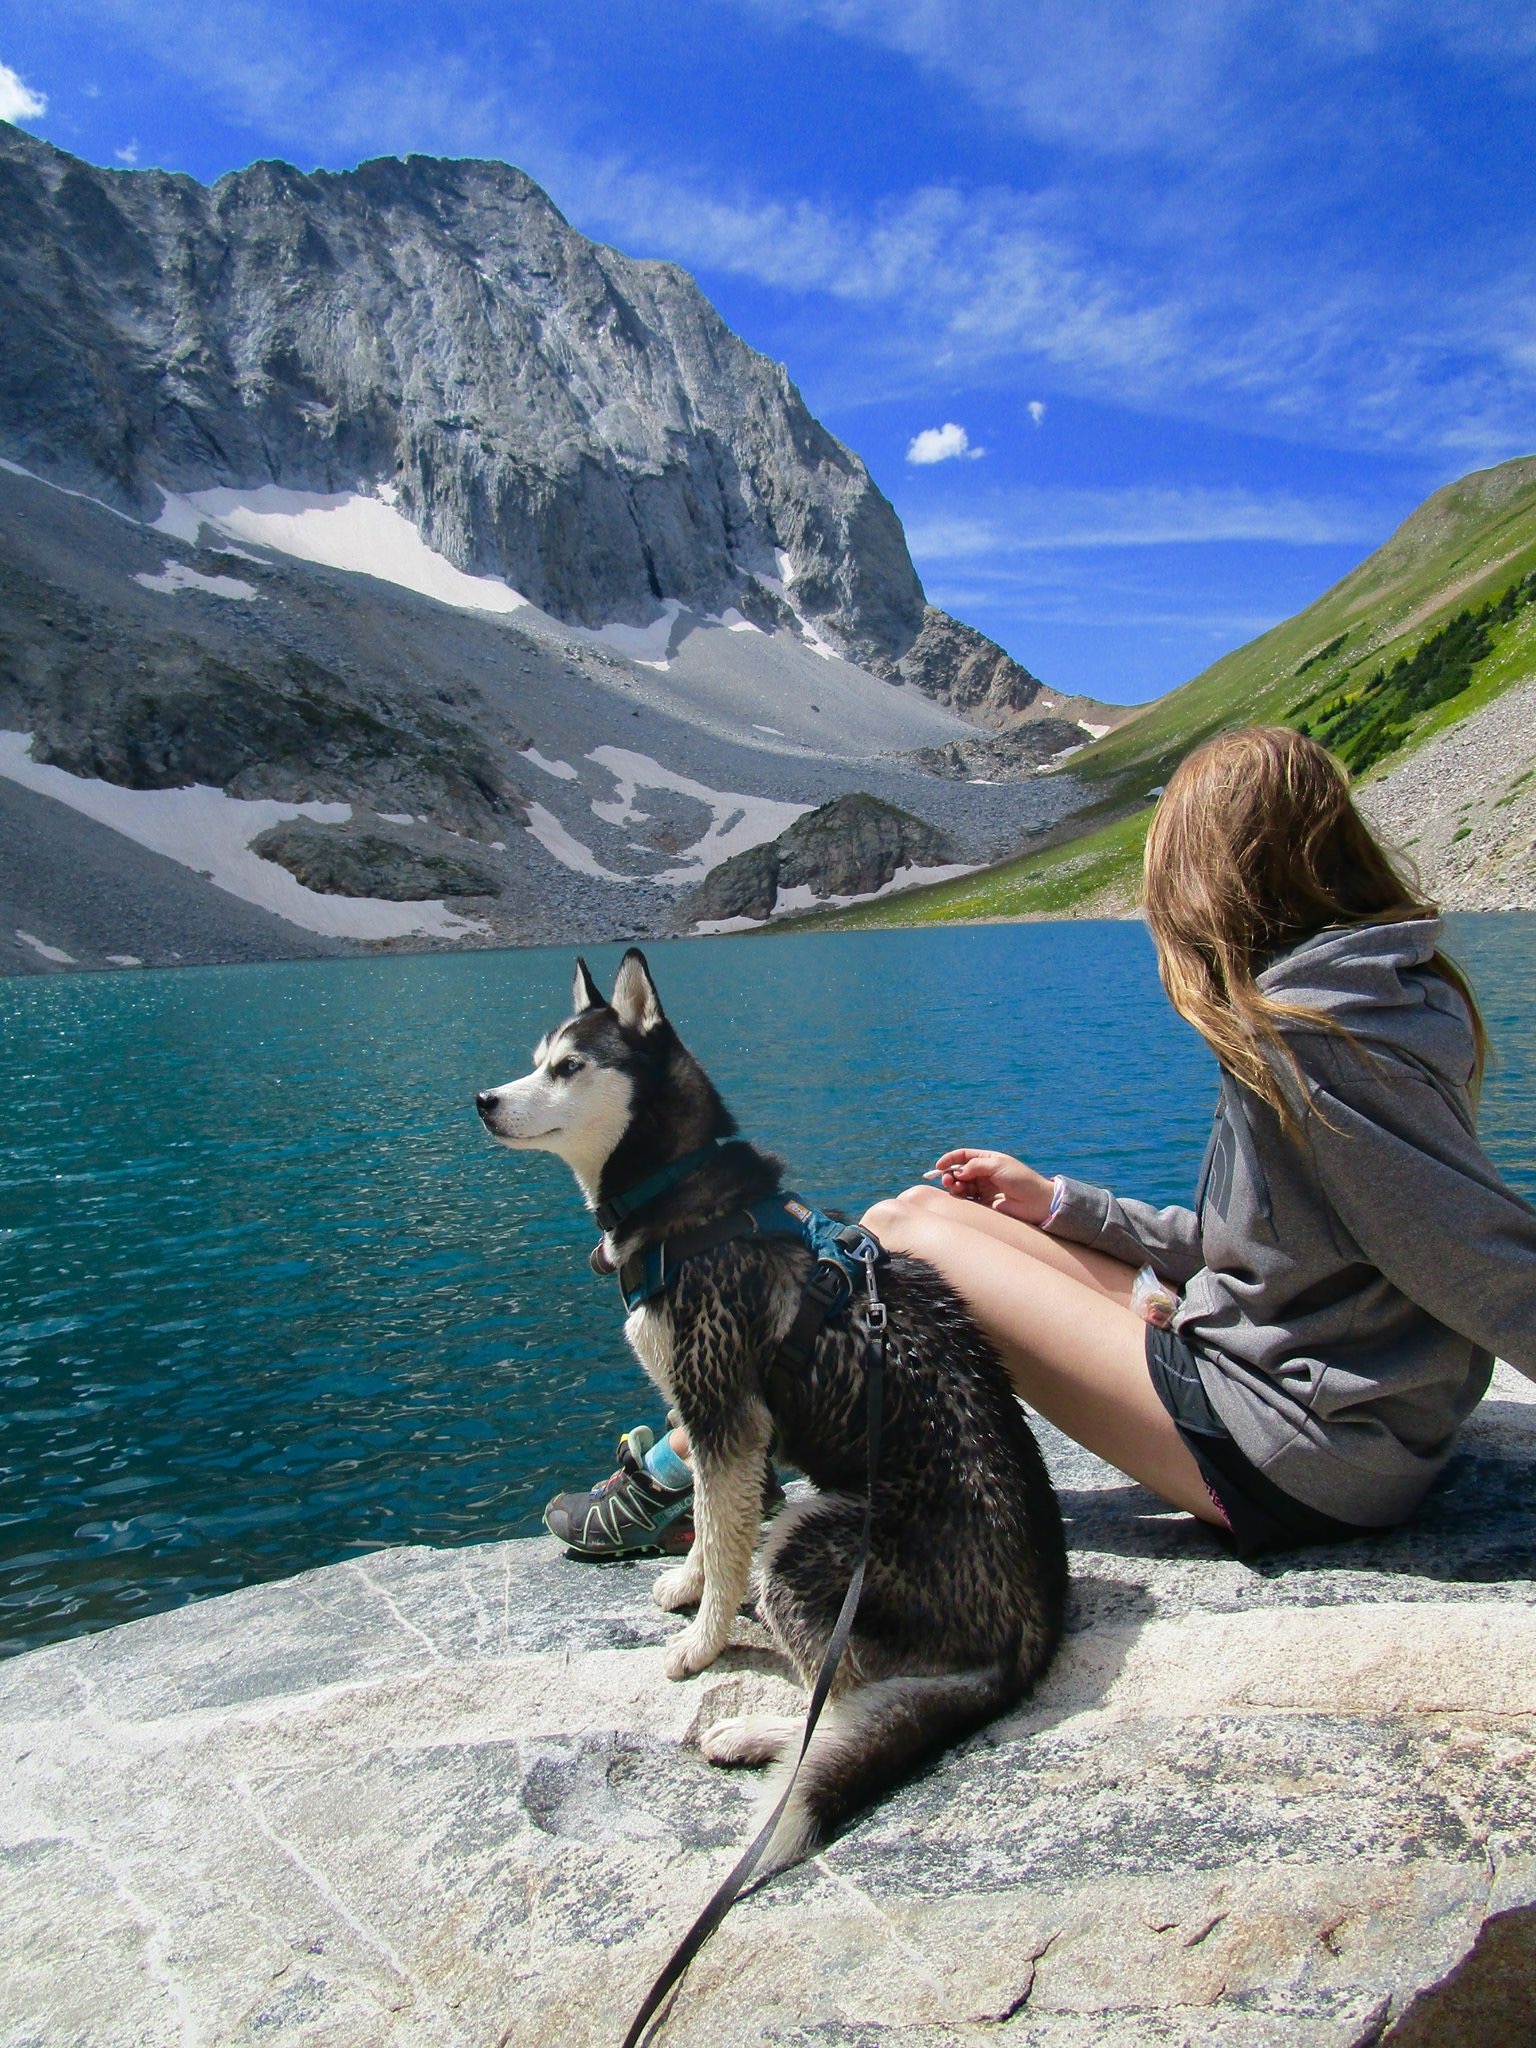 Woman and dog sitting on a rock at the edge of a glacier lake